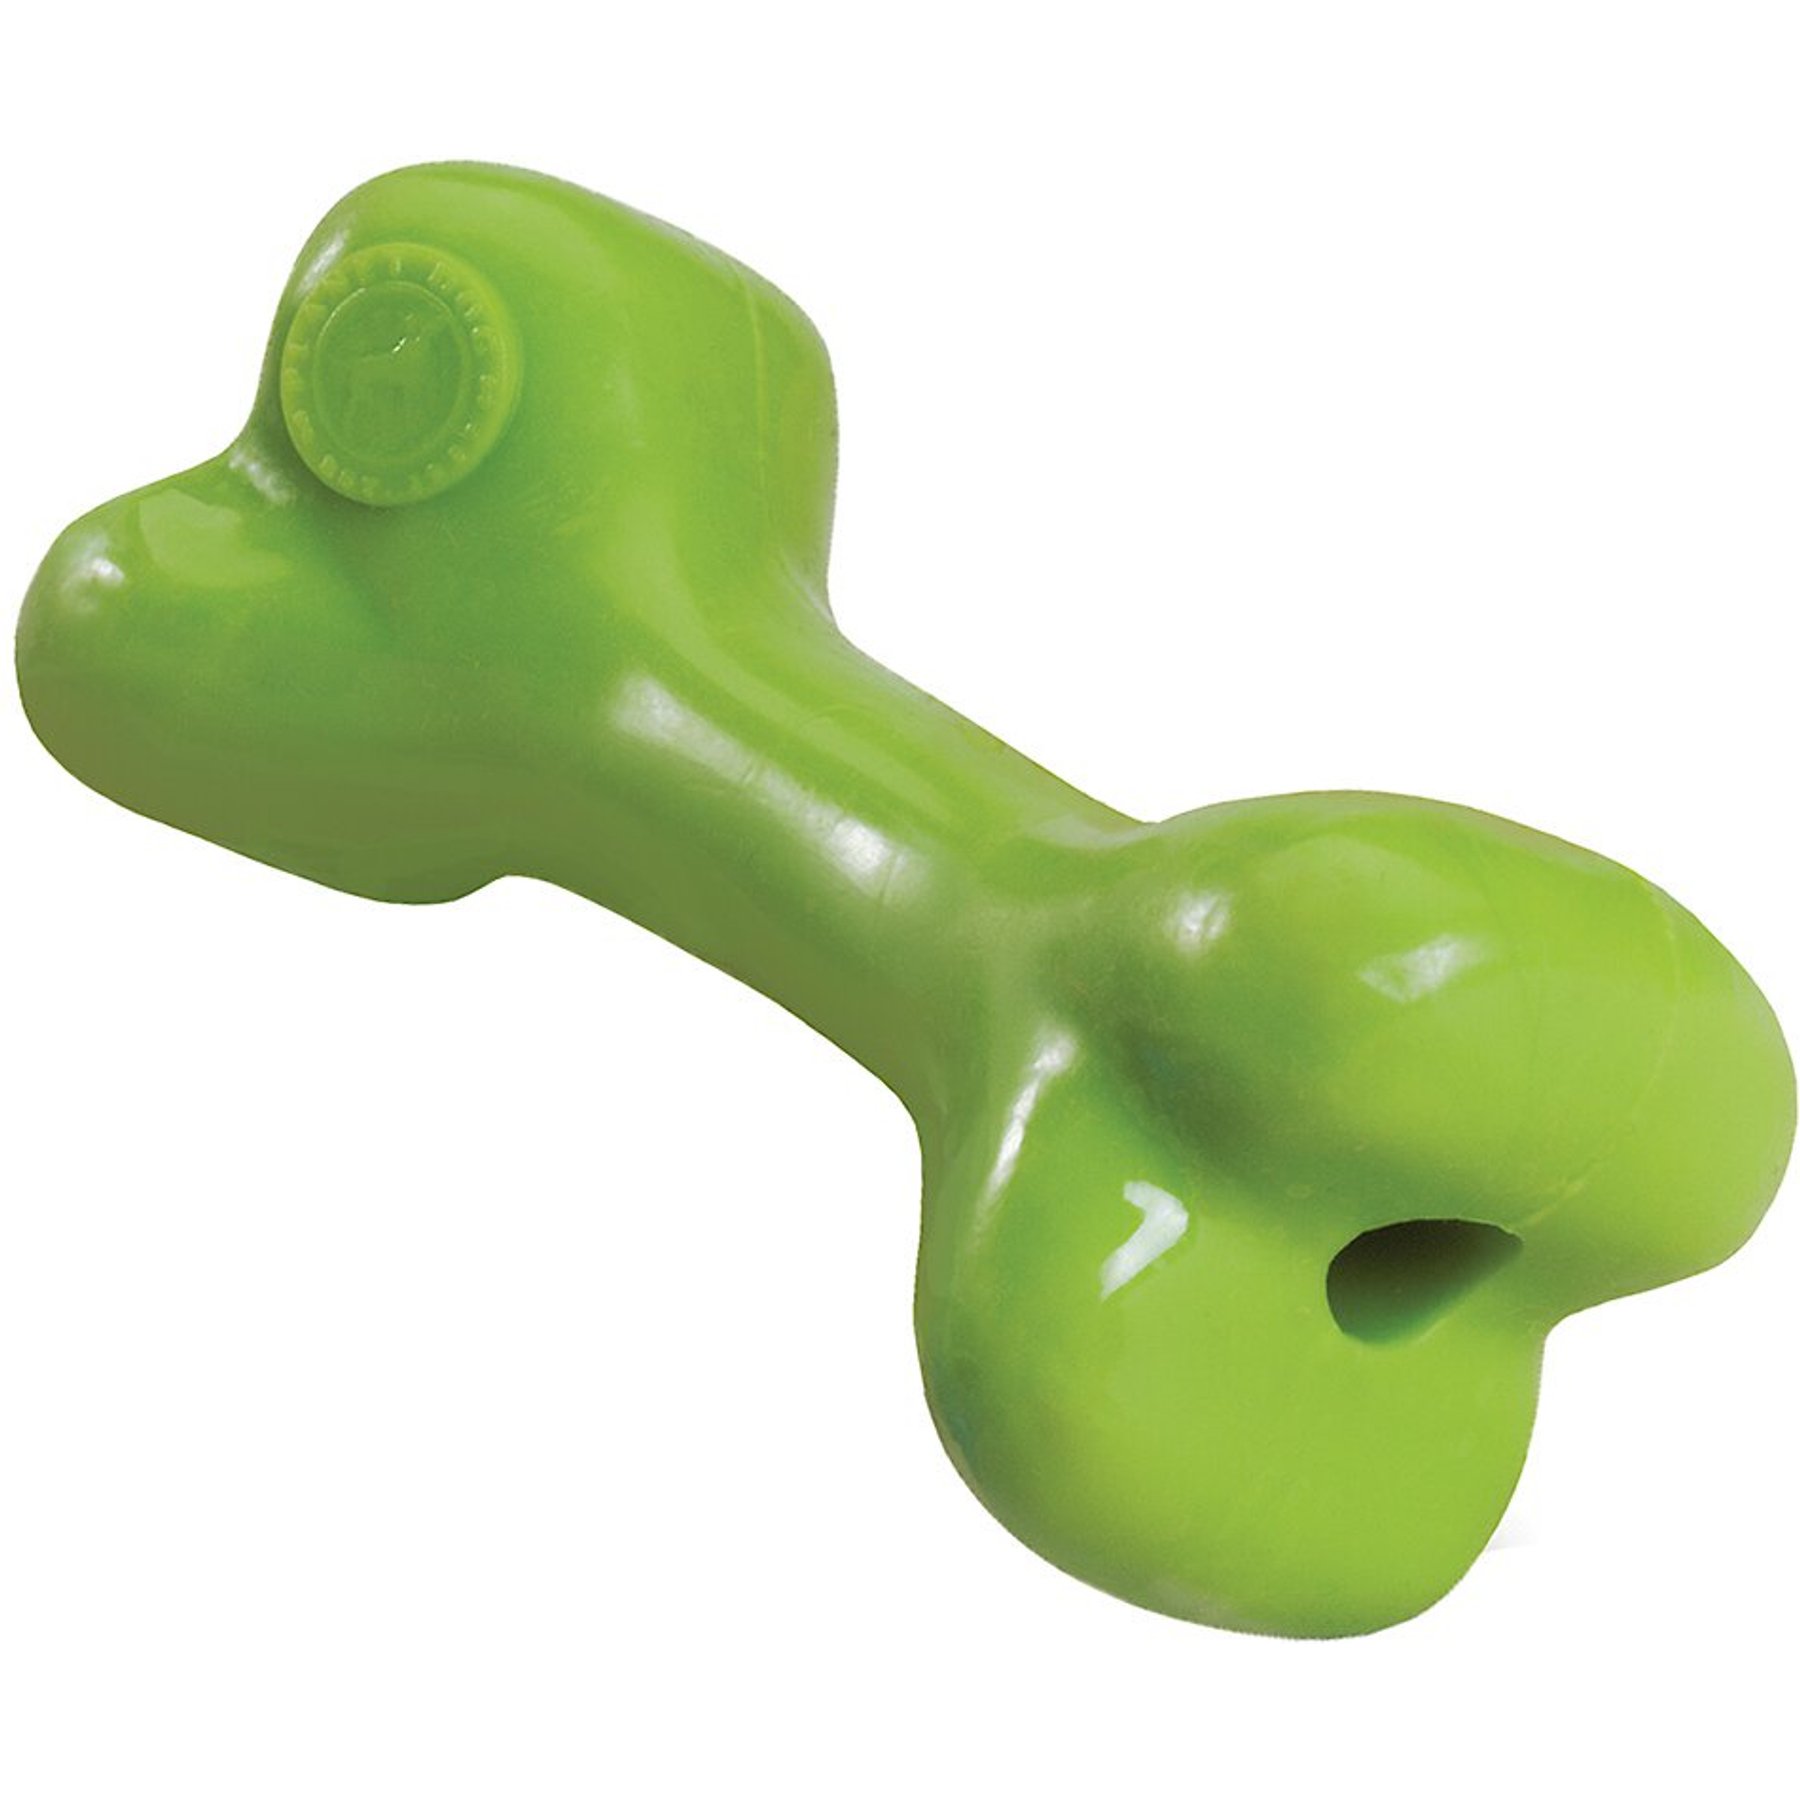 Planet Dog Old Soul Bone Orbee Dog Toys, Teal, Small